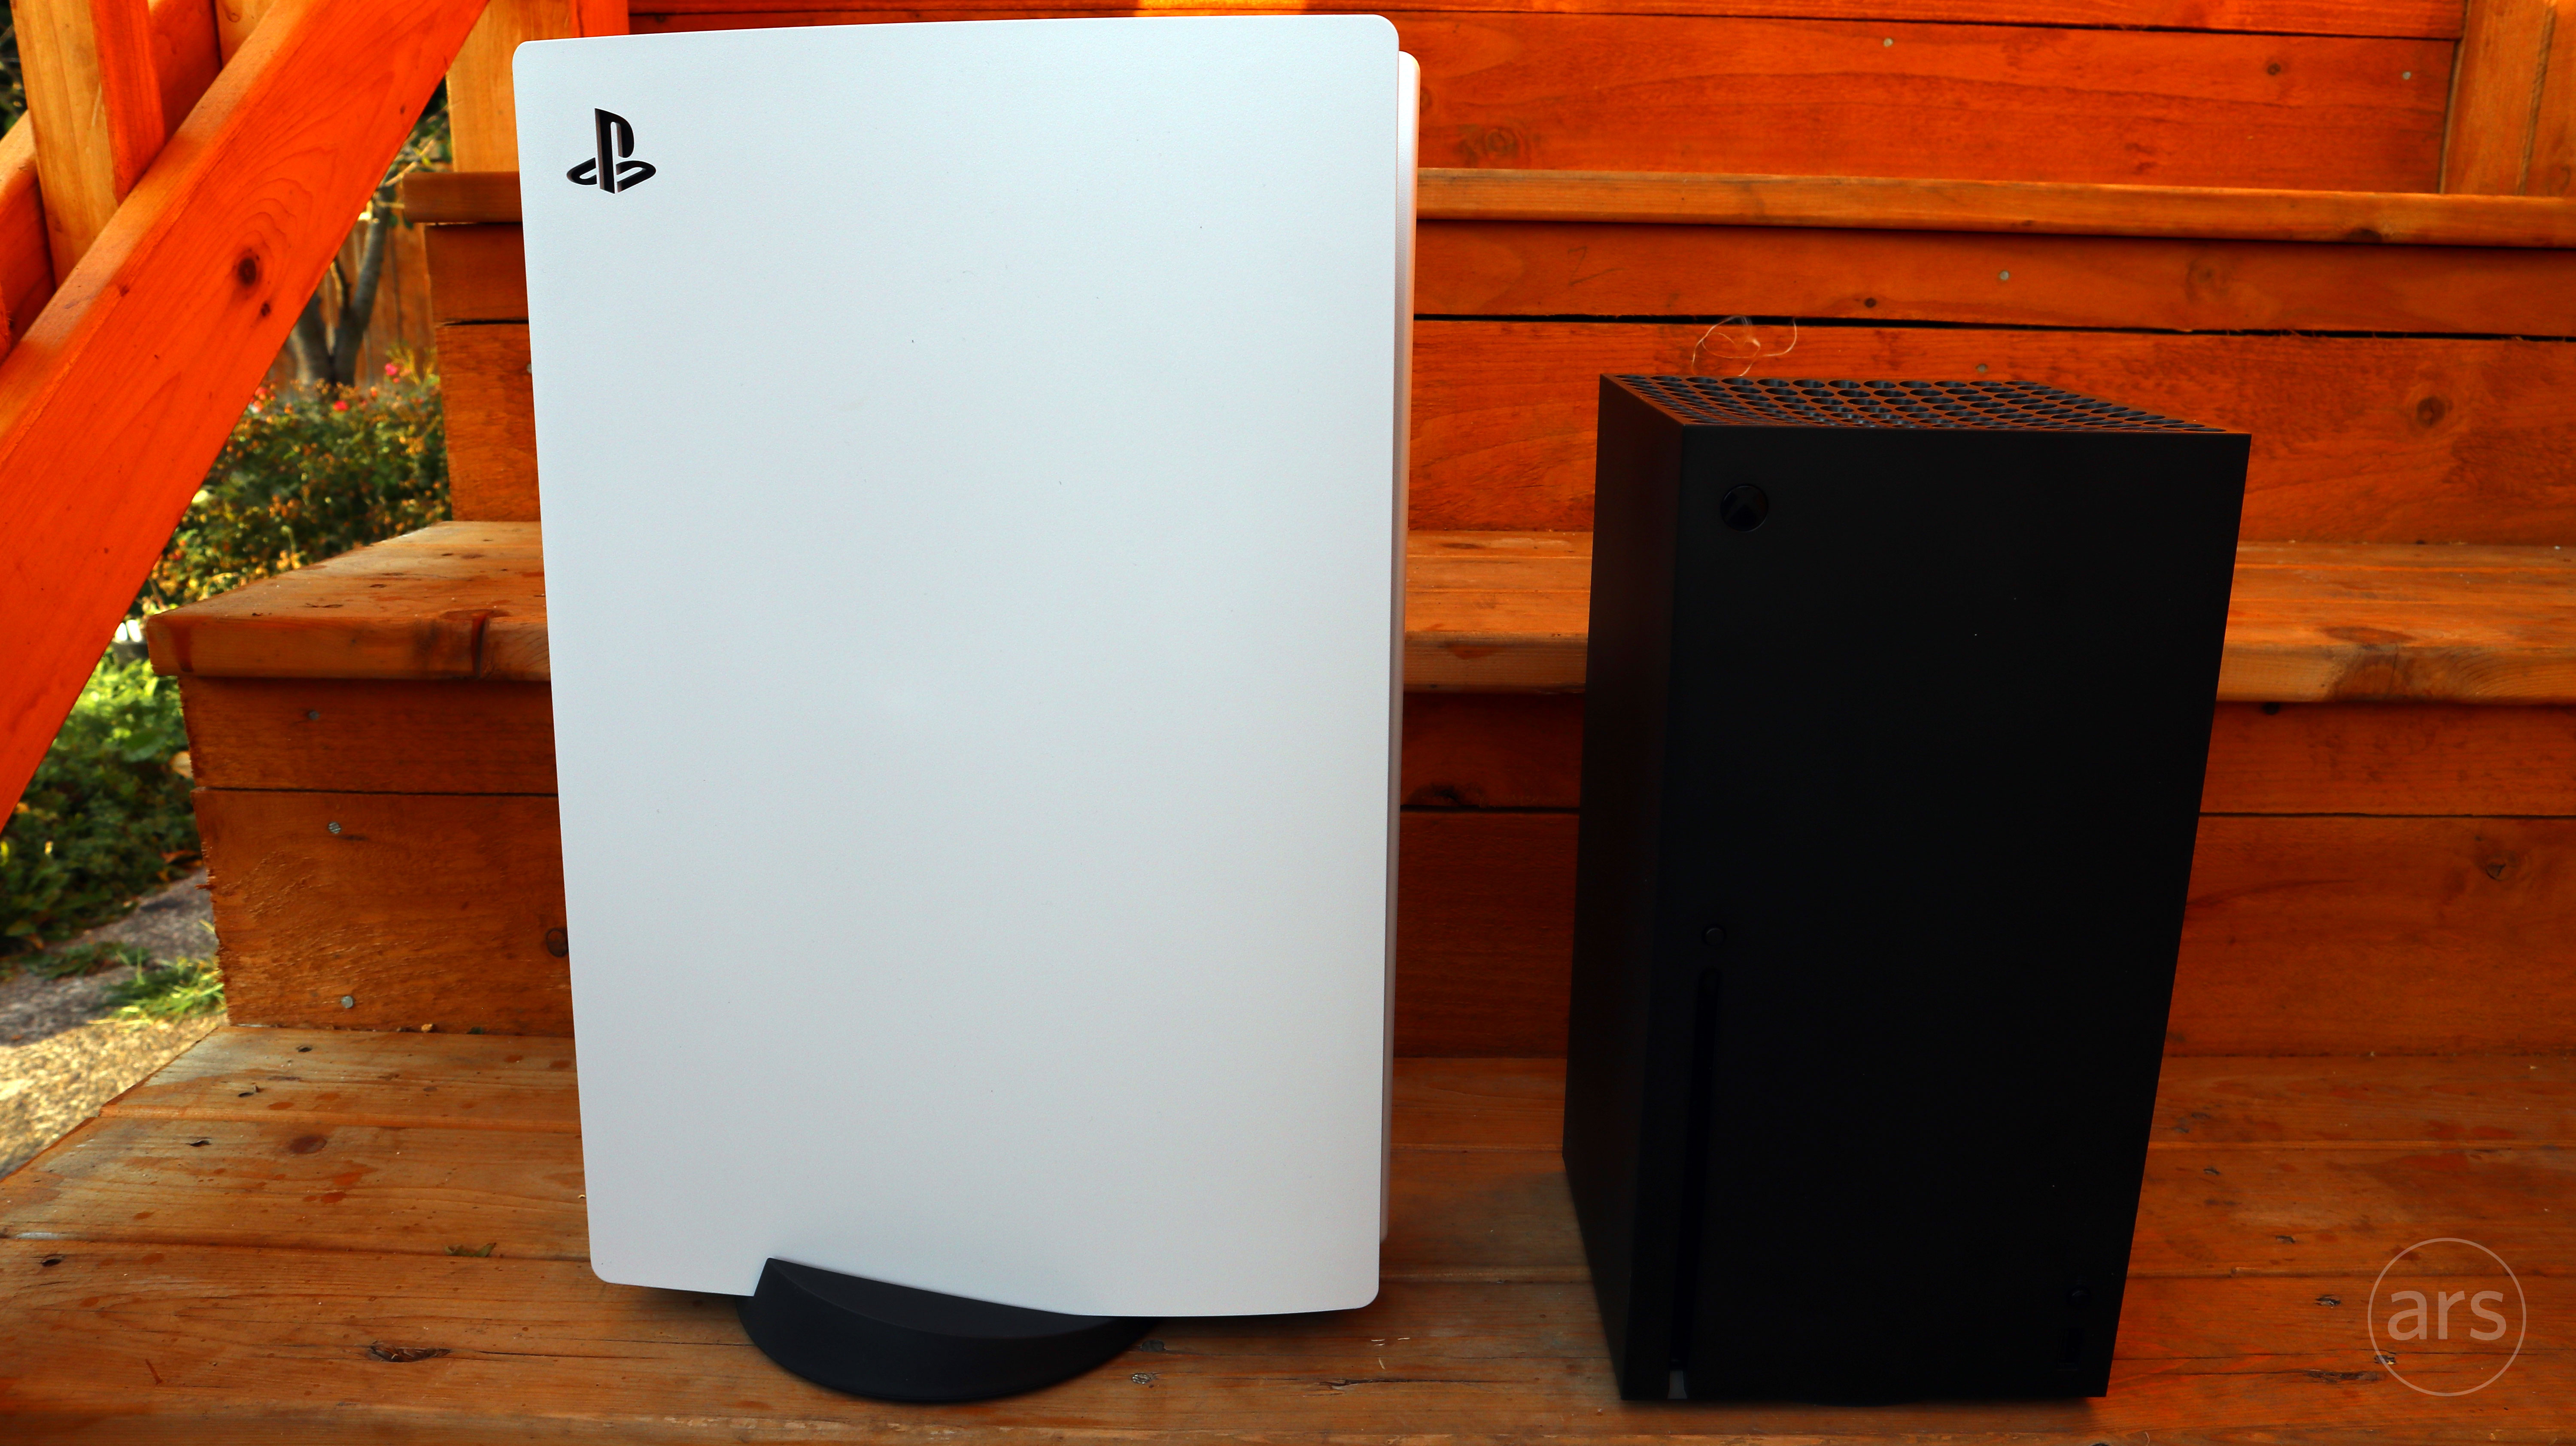 PS5 unboxing: Sony's big, curvy boy stands out in any room